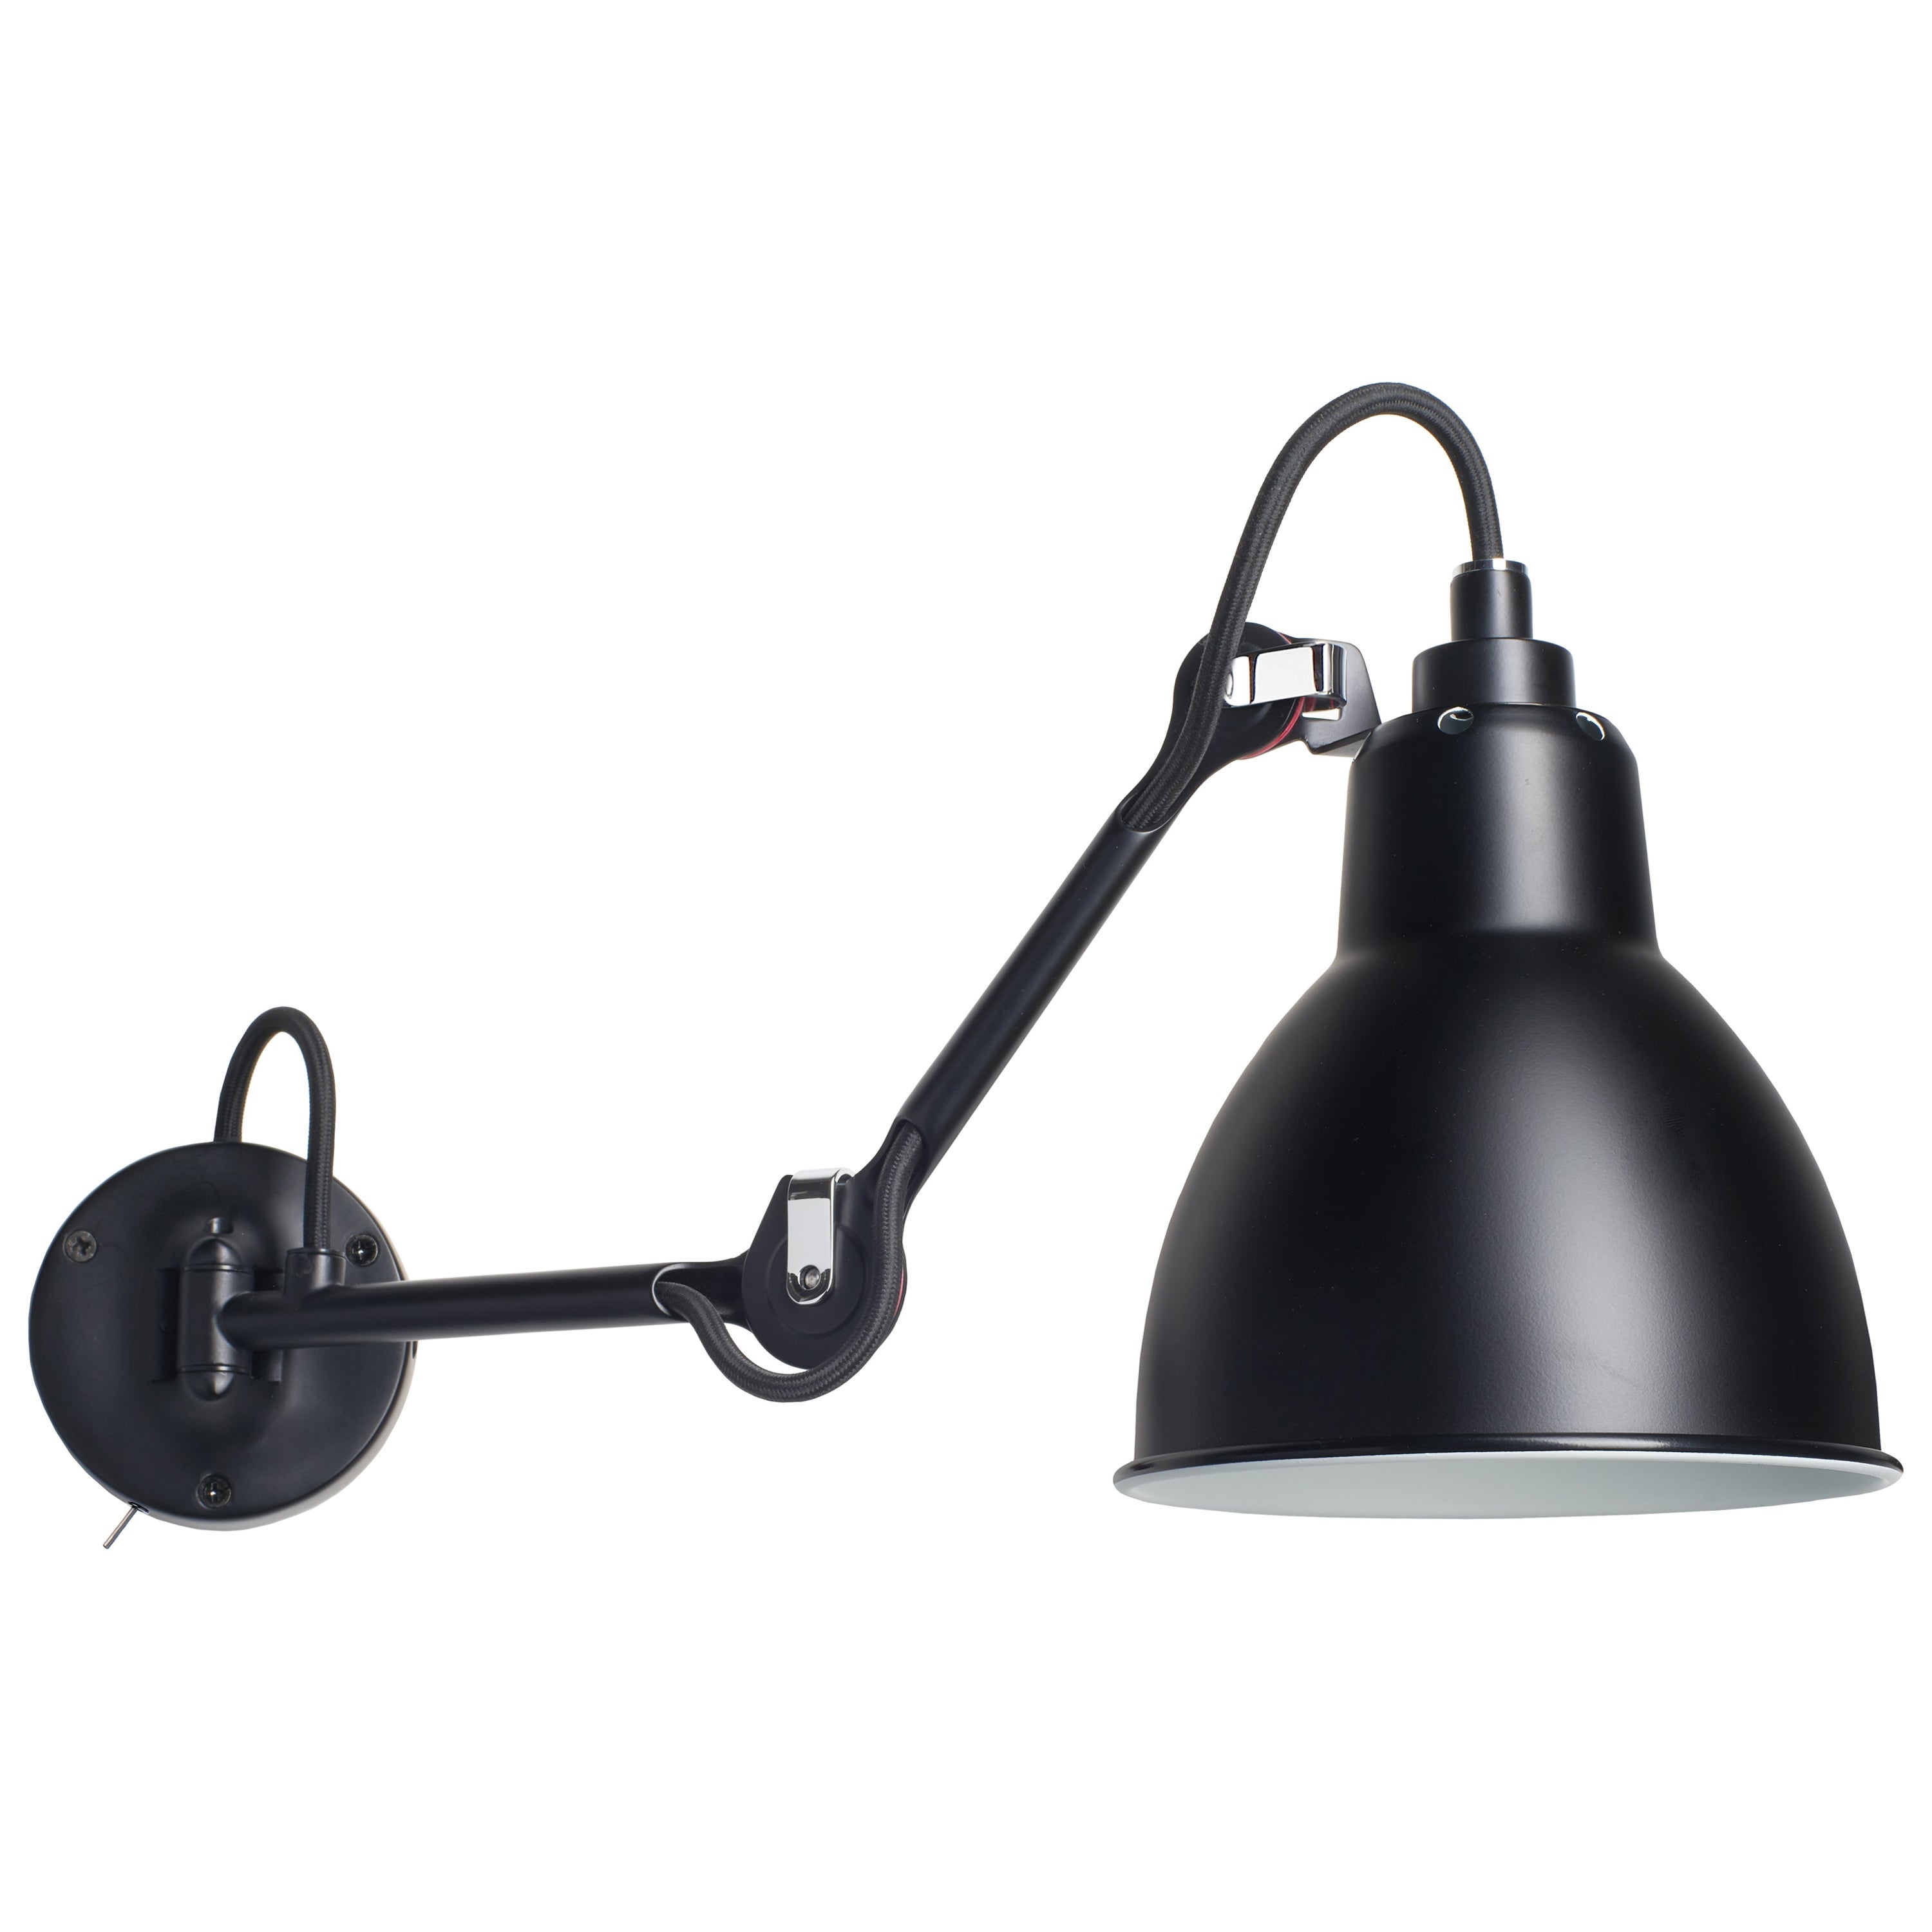 DCW Editions La Lampe Gras N°204 SW Wall Lamp in Black Steel Arm and Black Shade For Sale